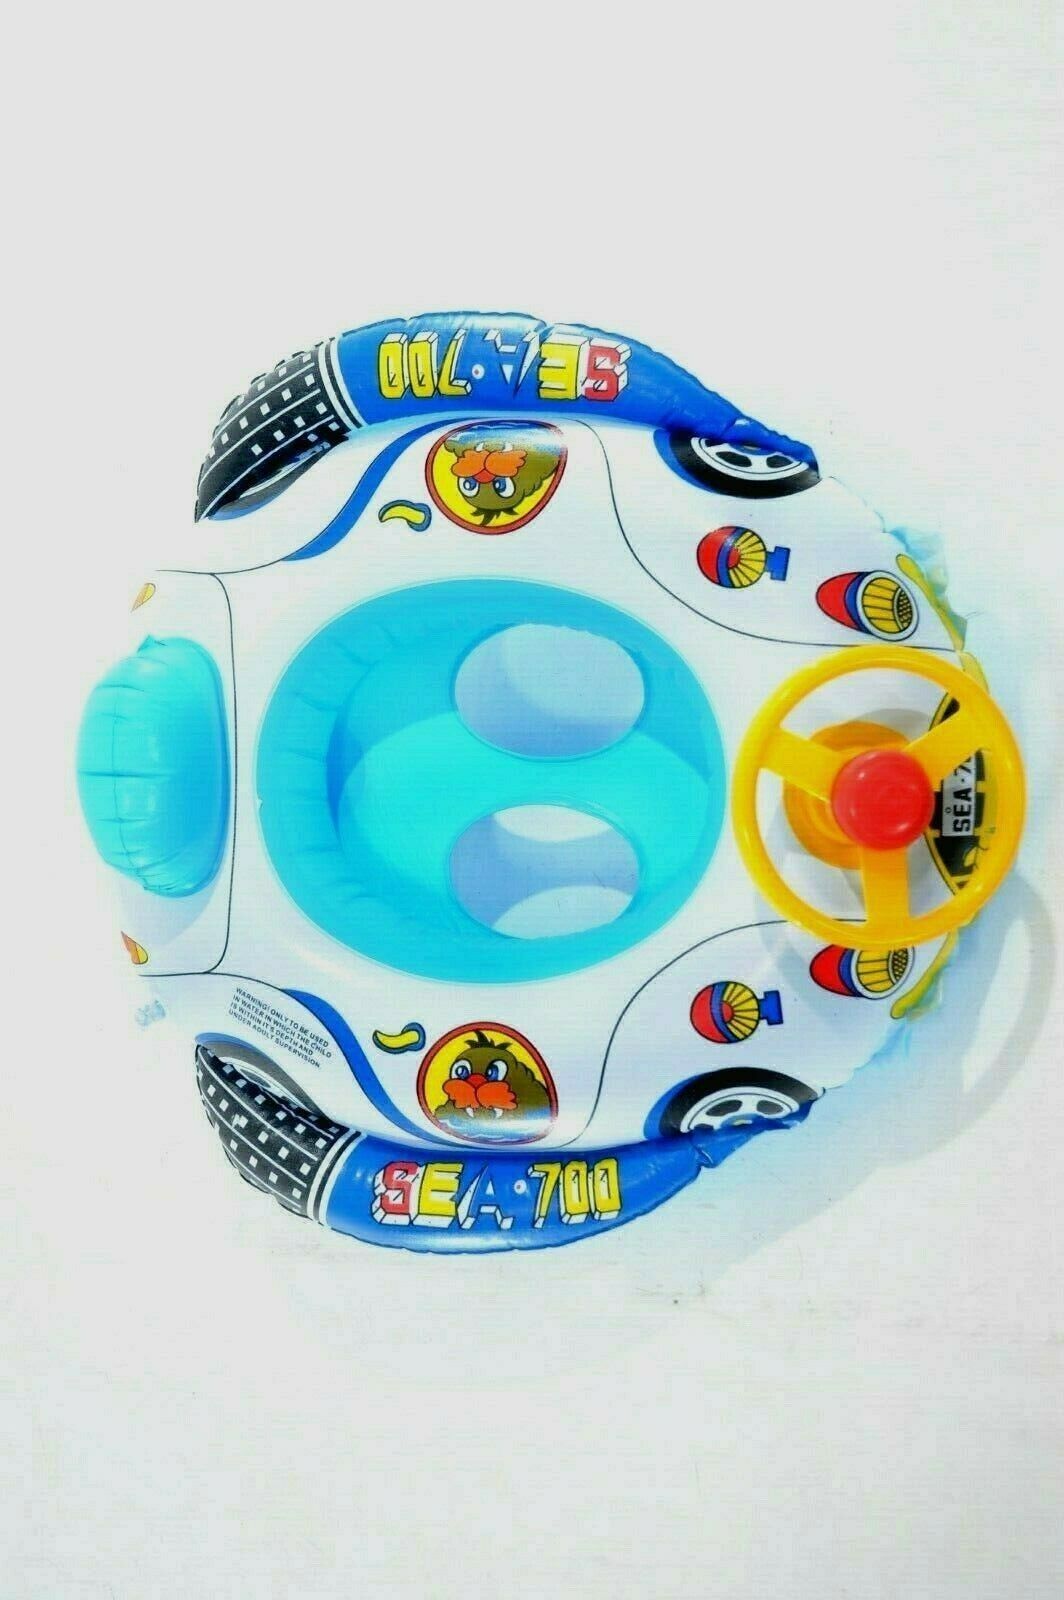 Inflatable Car Baby Kids Toddler Safety Swimming Pool Float Seat Boat Ring Wheel